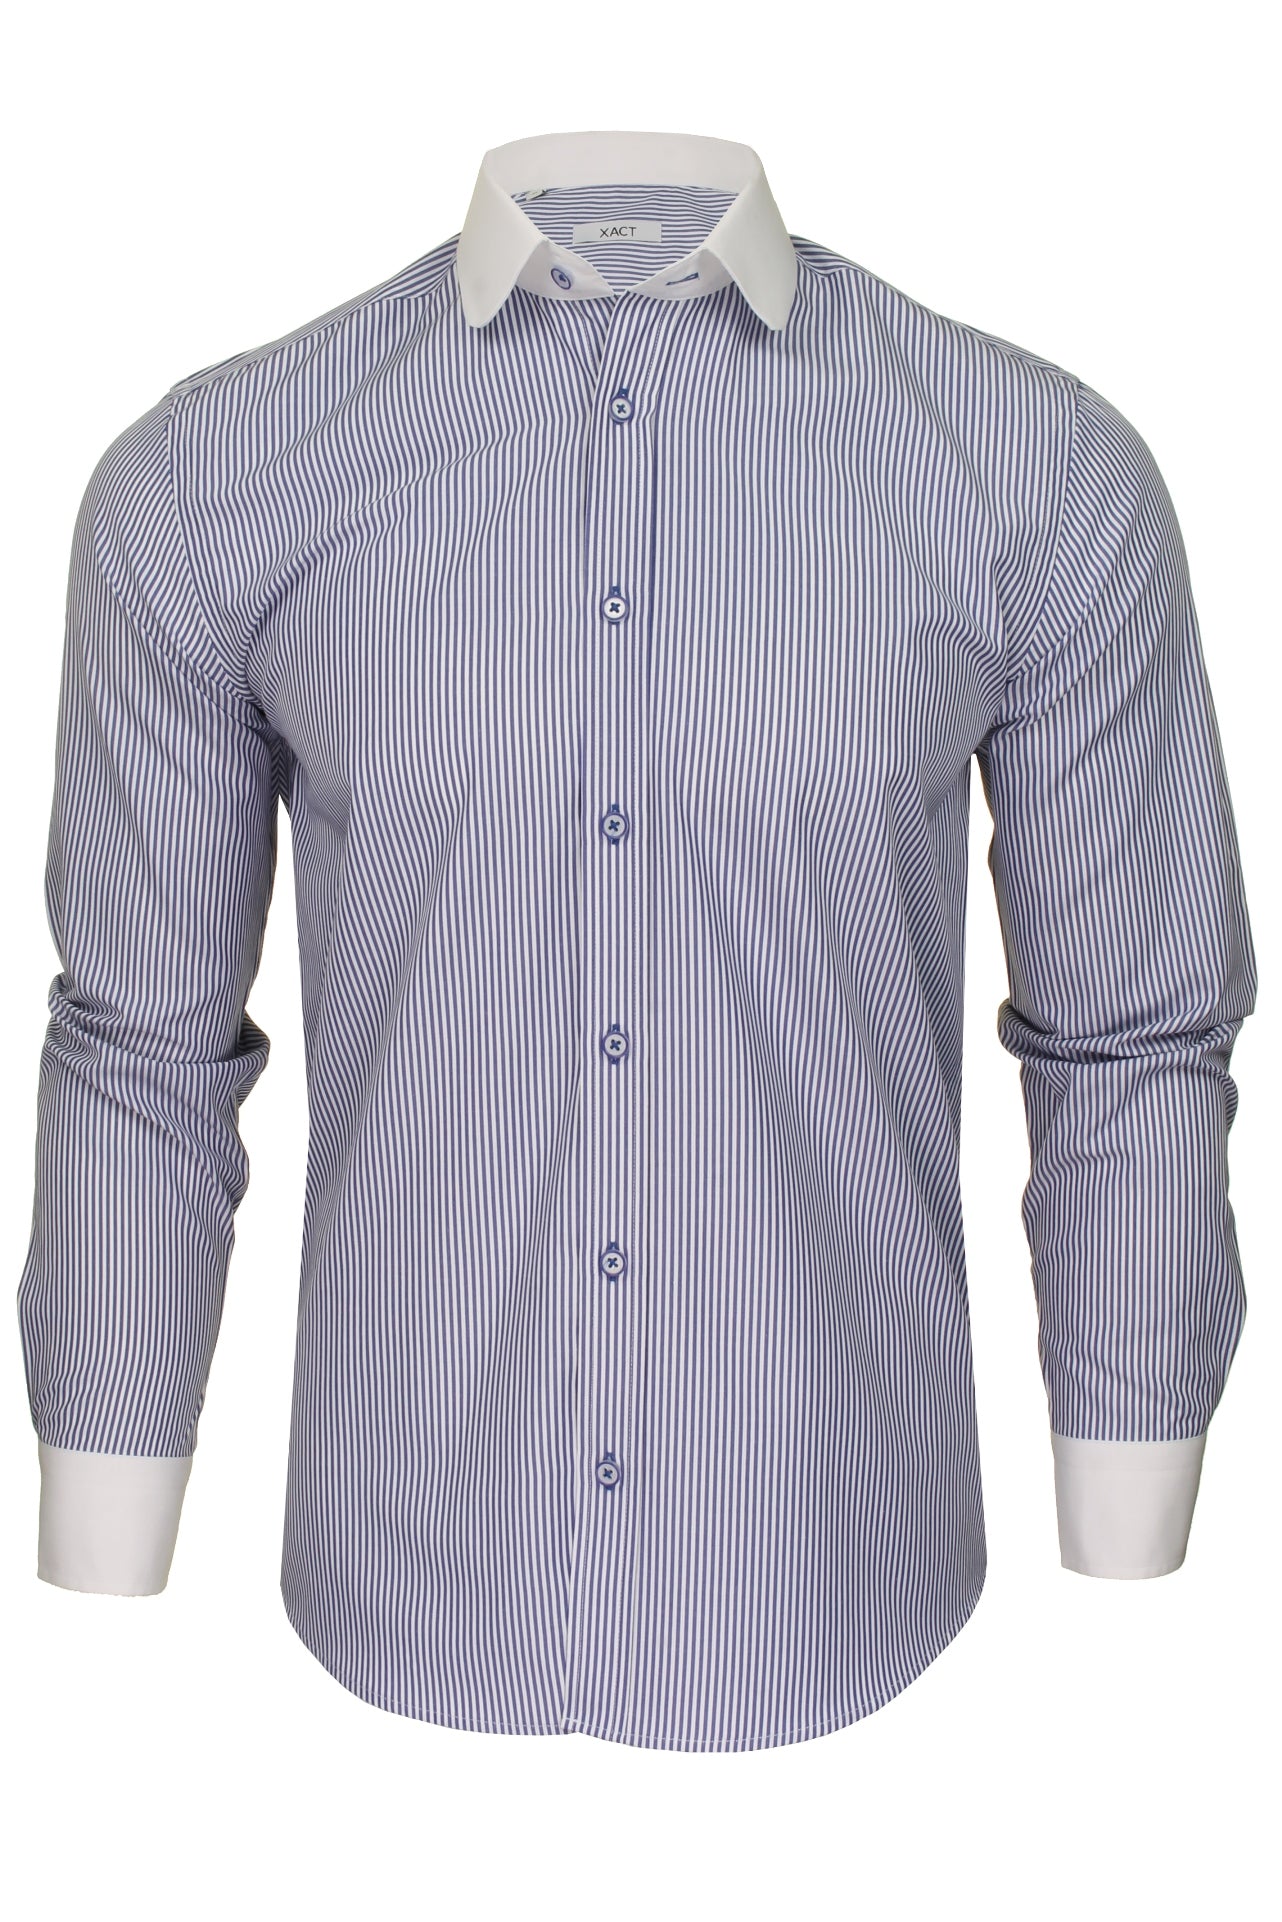 Xact Men's Long-Sleeved Striped Shirt with White Penny/Club Collar and White Cuffs-2